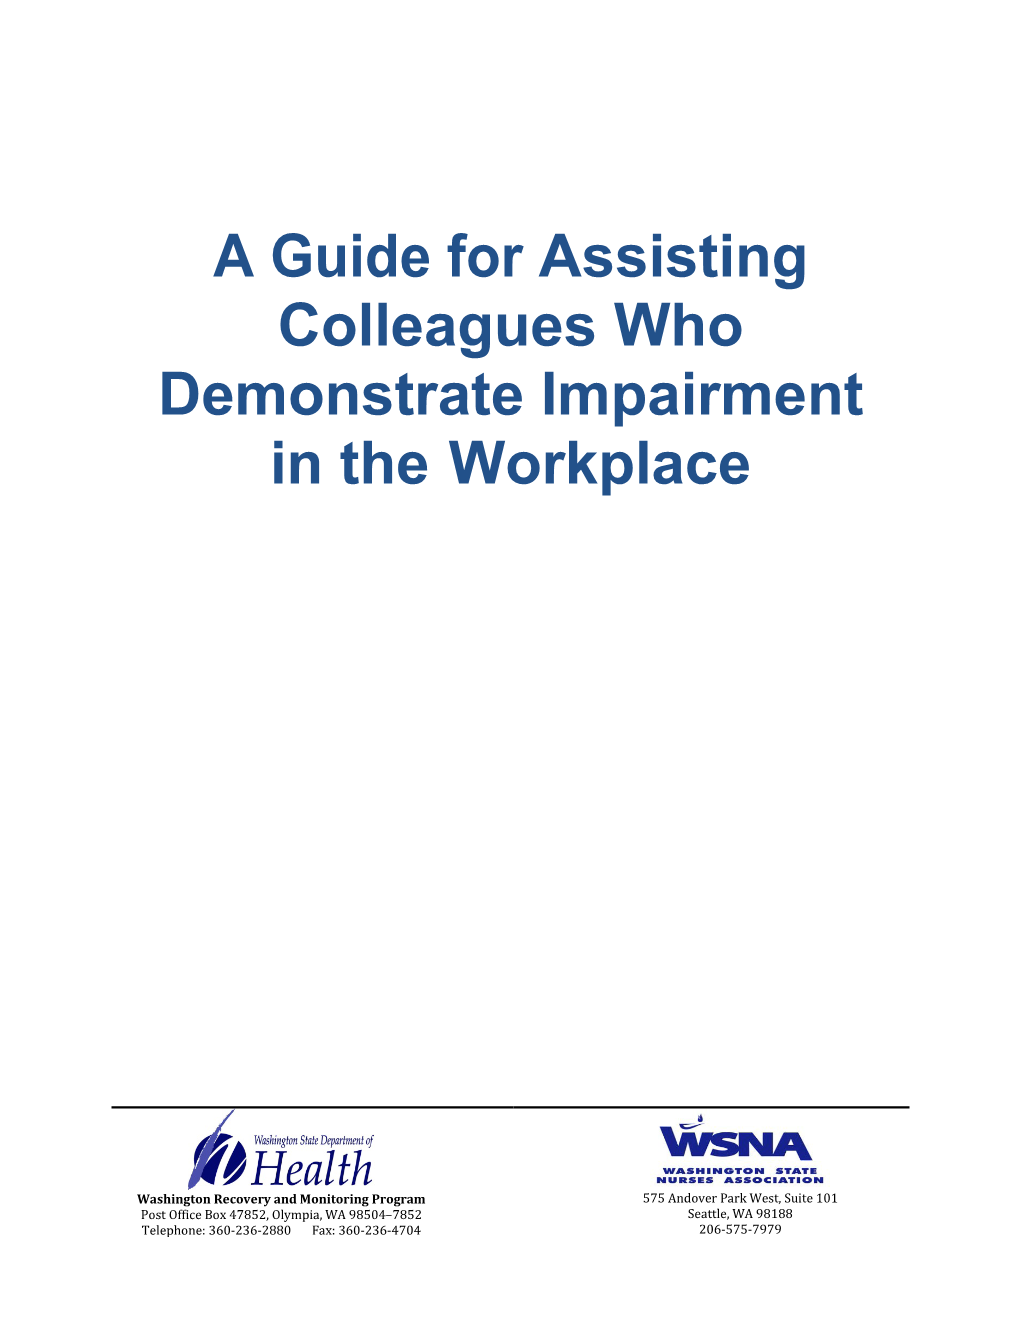 A Guide for Assisting Colleagues Who Demonstrate Impairment in the Workplace